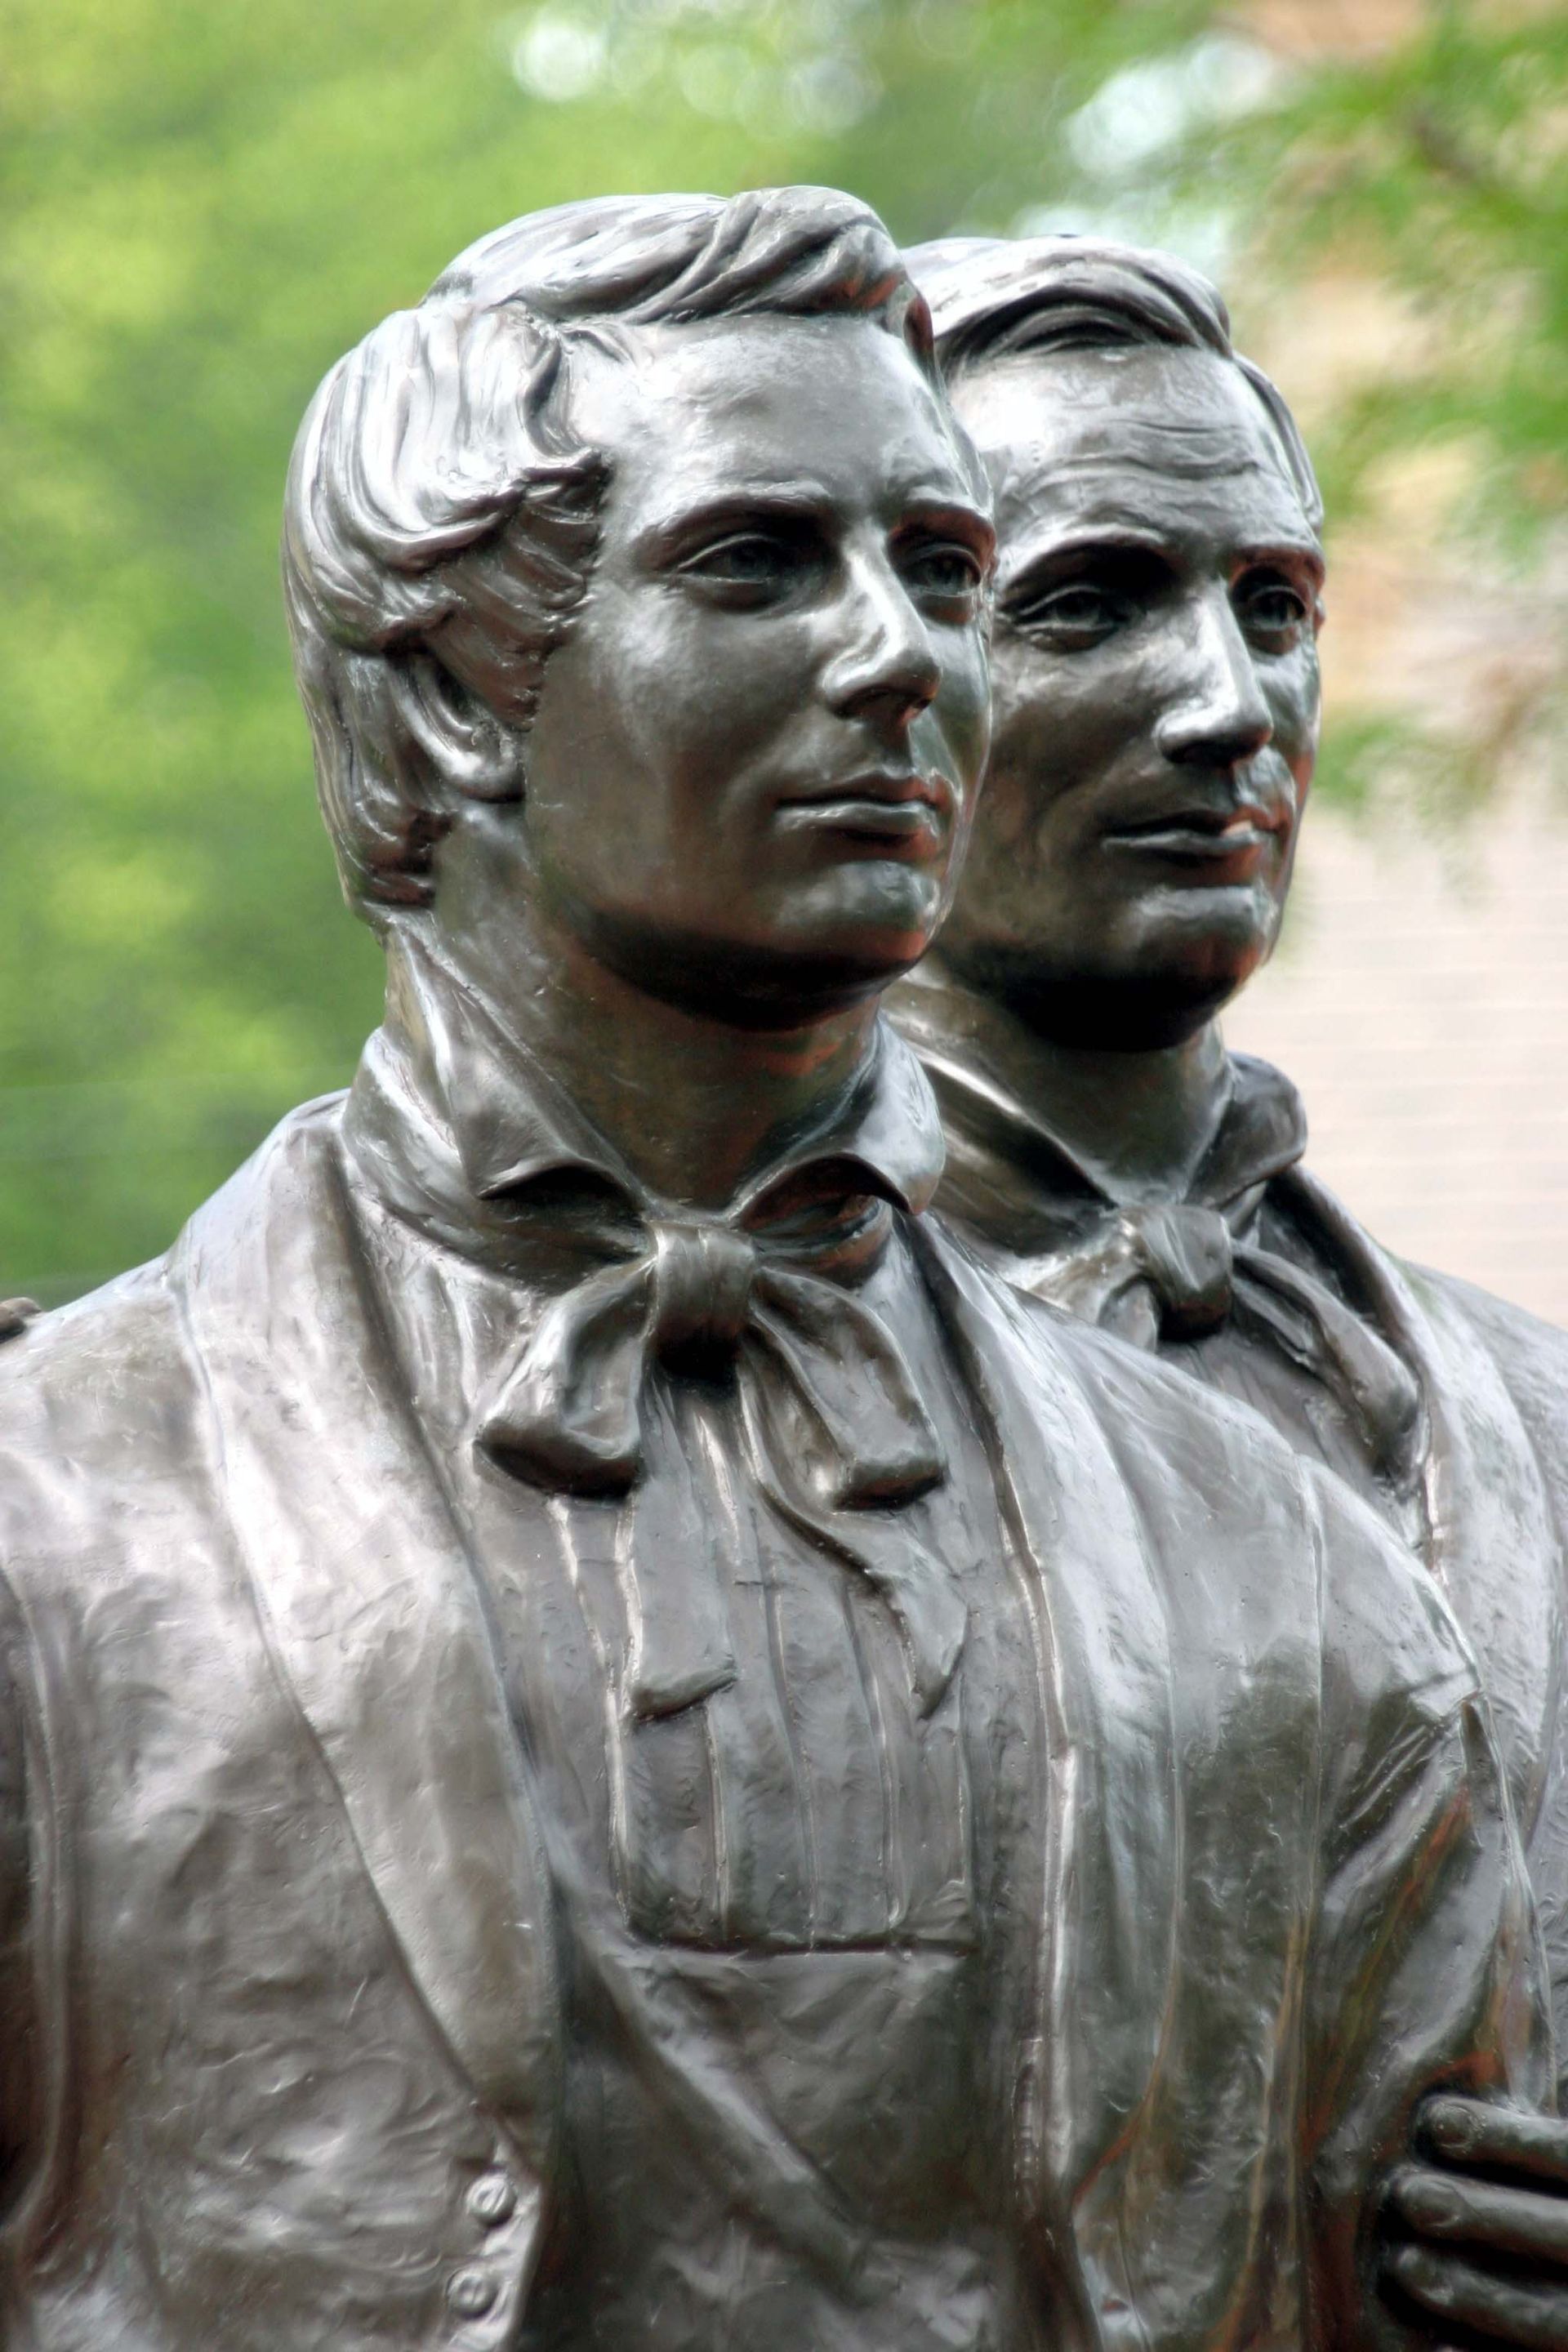 A close-up of the faces of the statue of Joseph and Hyrum Smith by Carthage Jail in Illinois.